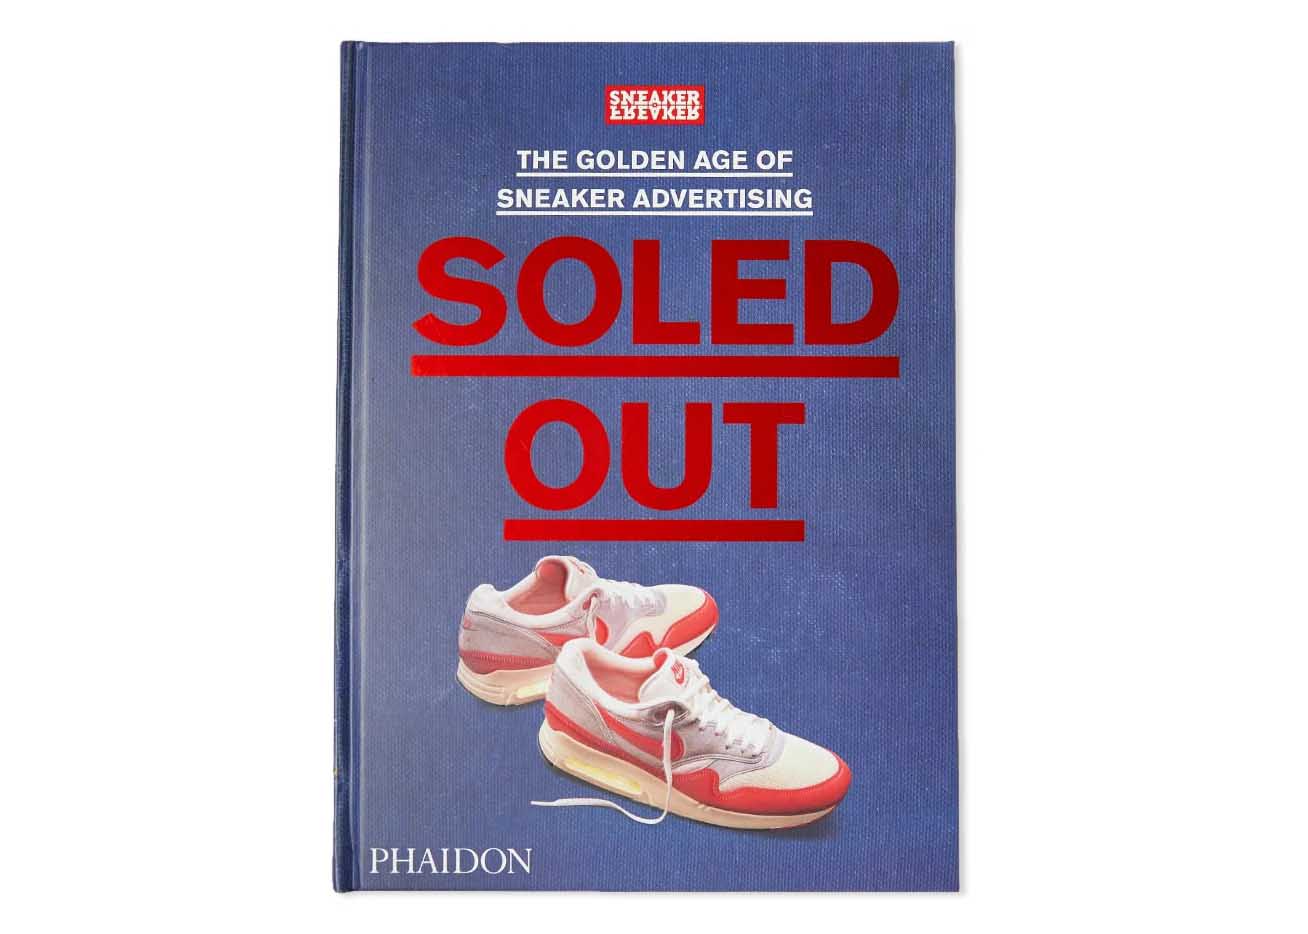 RvceShops - SOLED OUT: THE GOLDEN AGE OF SNEAKER ADVERTISING - Sneakers mit  Oxford-Schnürung Weiß